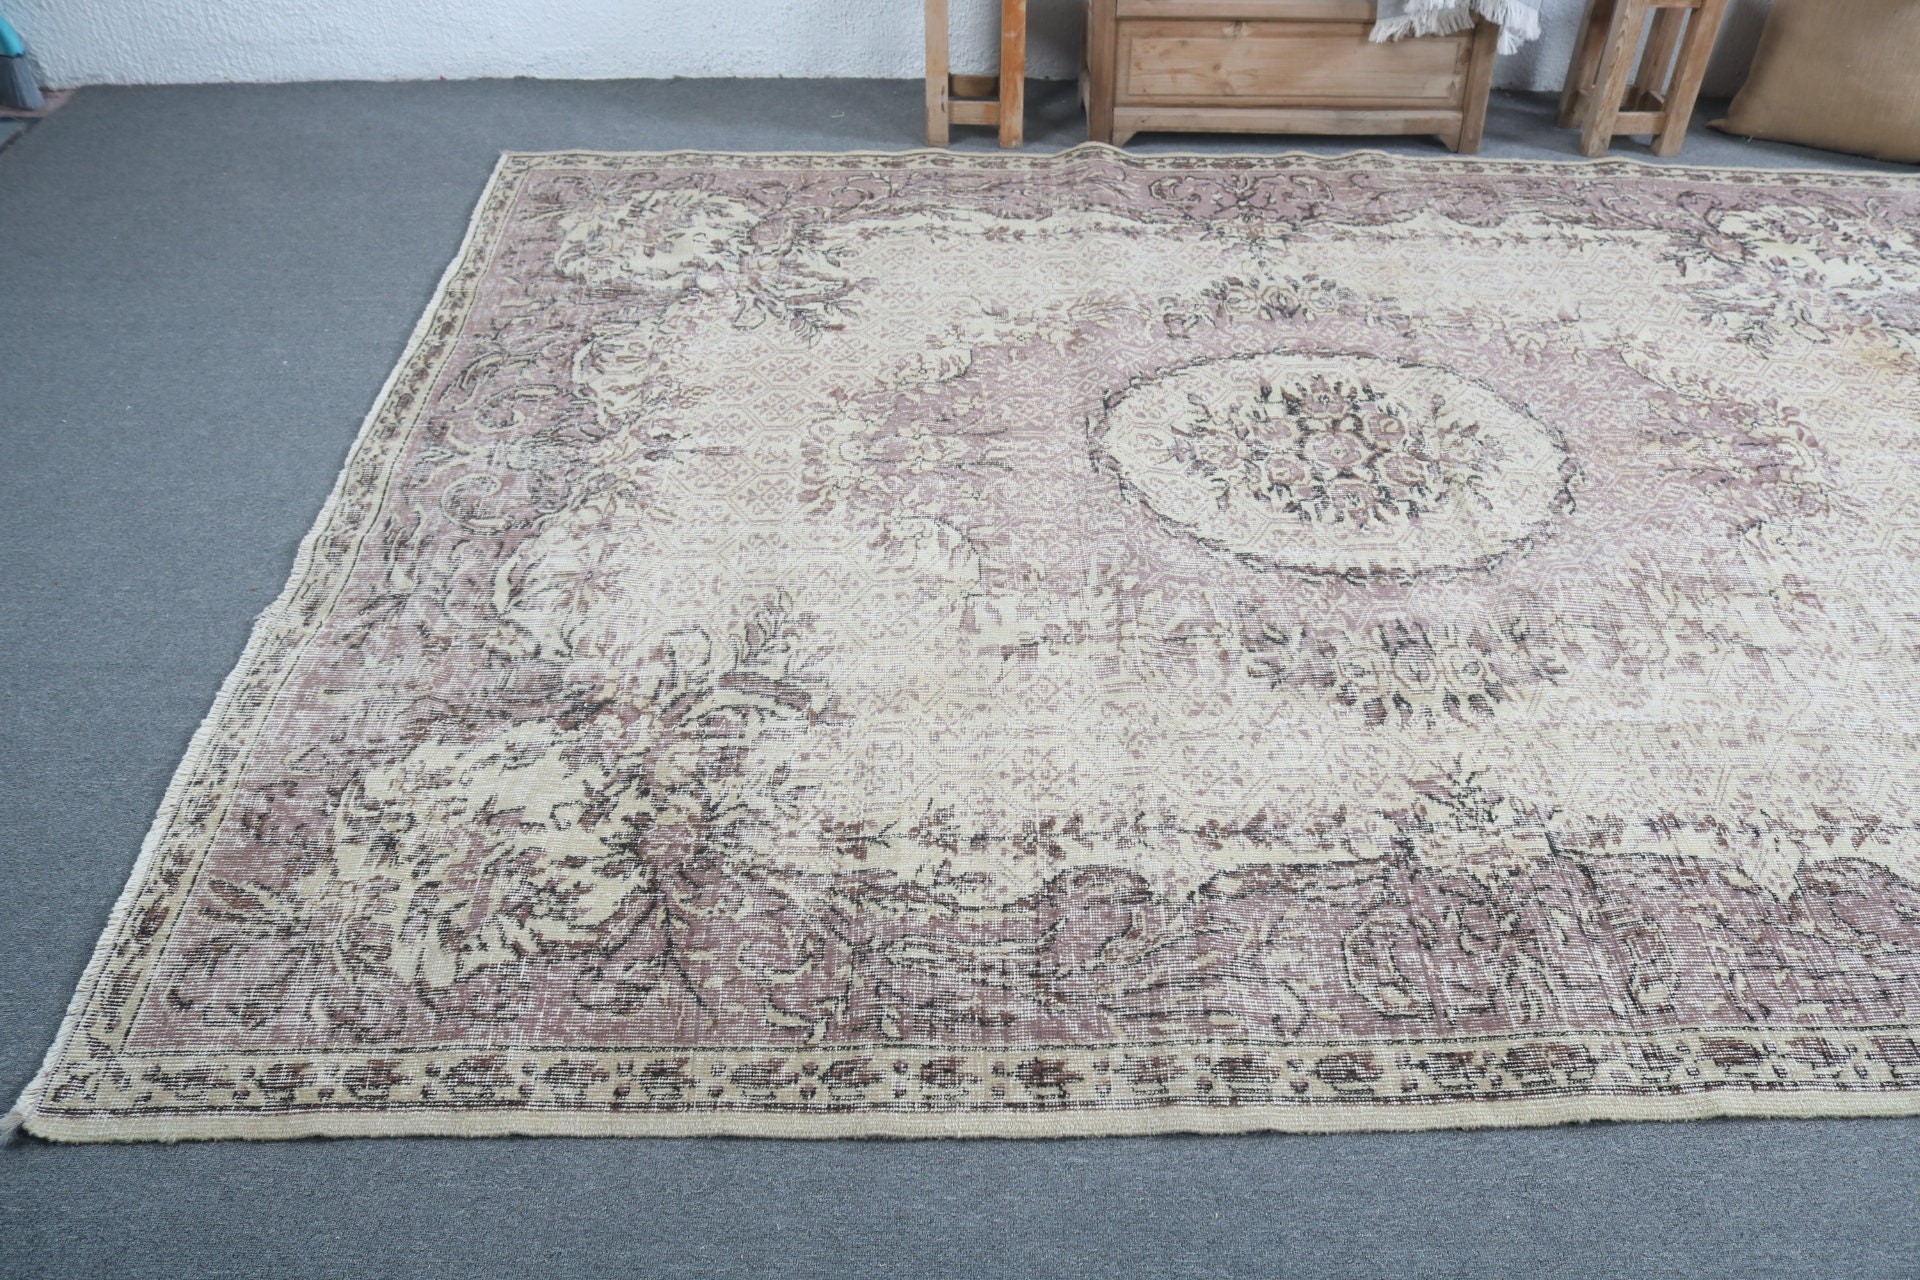 Vintage Rugs, Rugs for Salon, Living Room Rugs, Oushak Rugs, Turkish Rugs, Anatolian Rugs, 7.2x9.4 ft Large Rugs, Art Rugs, Dining Room Rug